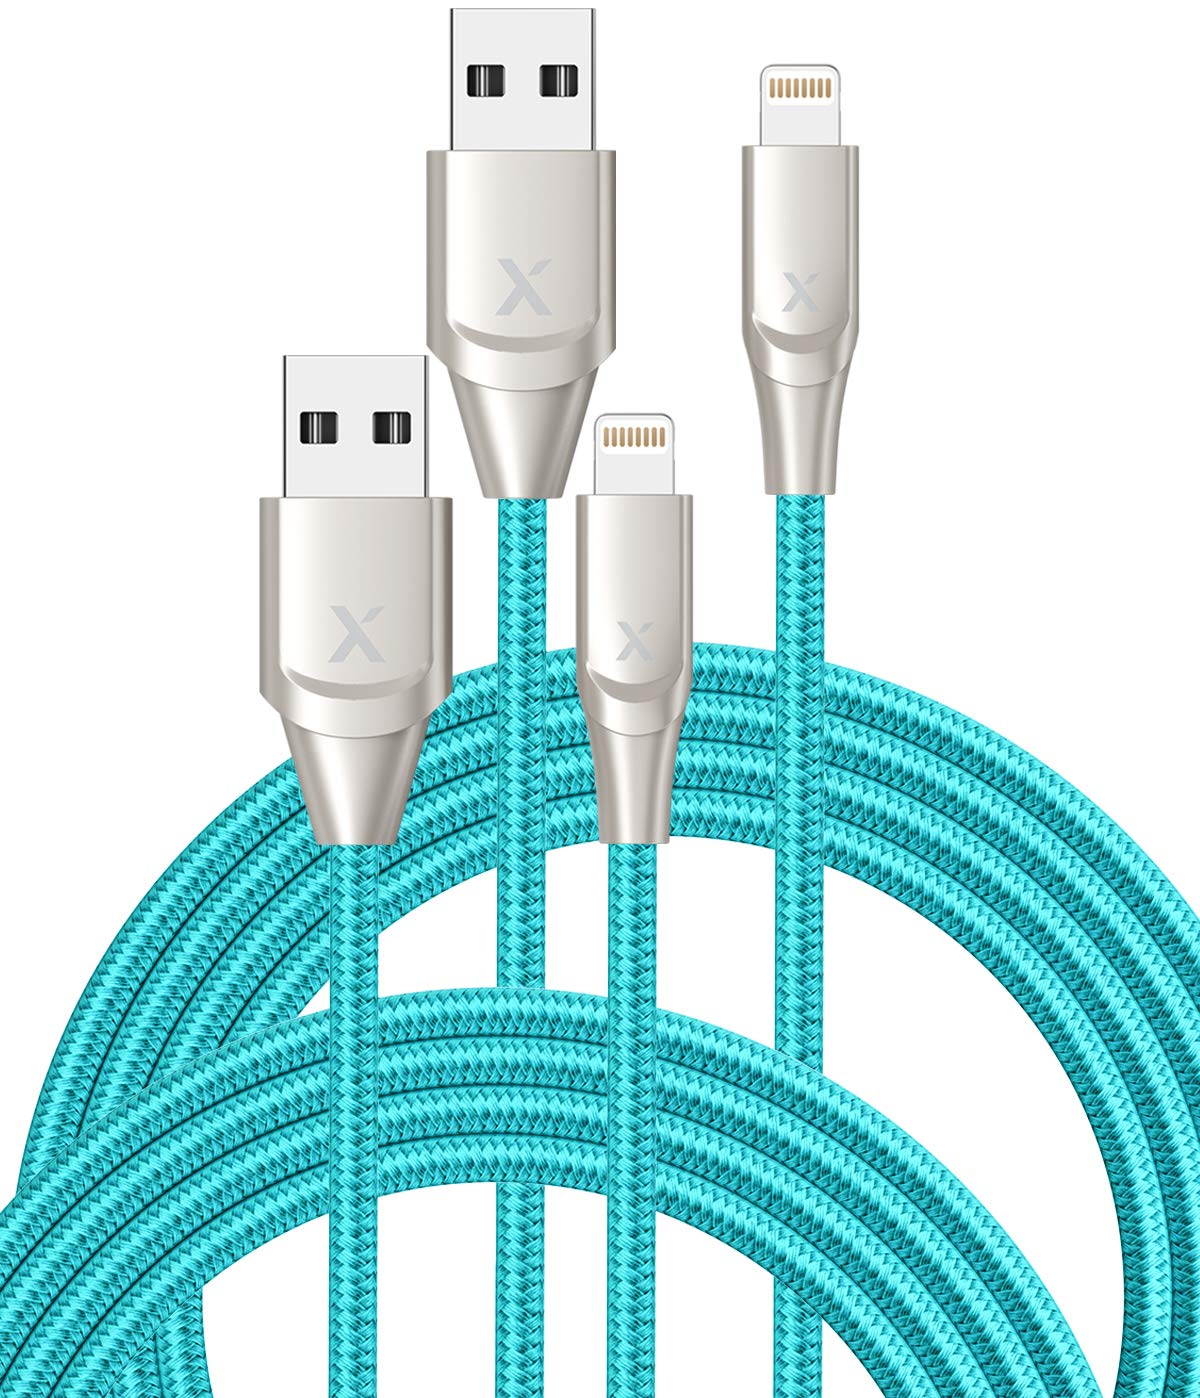 Book Cover Xcentz iPhone Charger 2 Pack 6ft, Apple MFi Certified Lightning Cable Fast Charger iPhone Cable, Durable Braided Nylon Metal Connector Charger Cord for iPhone 11/X/XS Max/XR/8 Plus/7/6/5, ipad - Blue